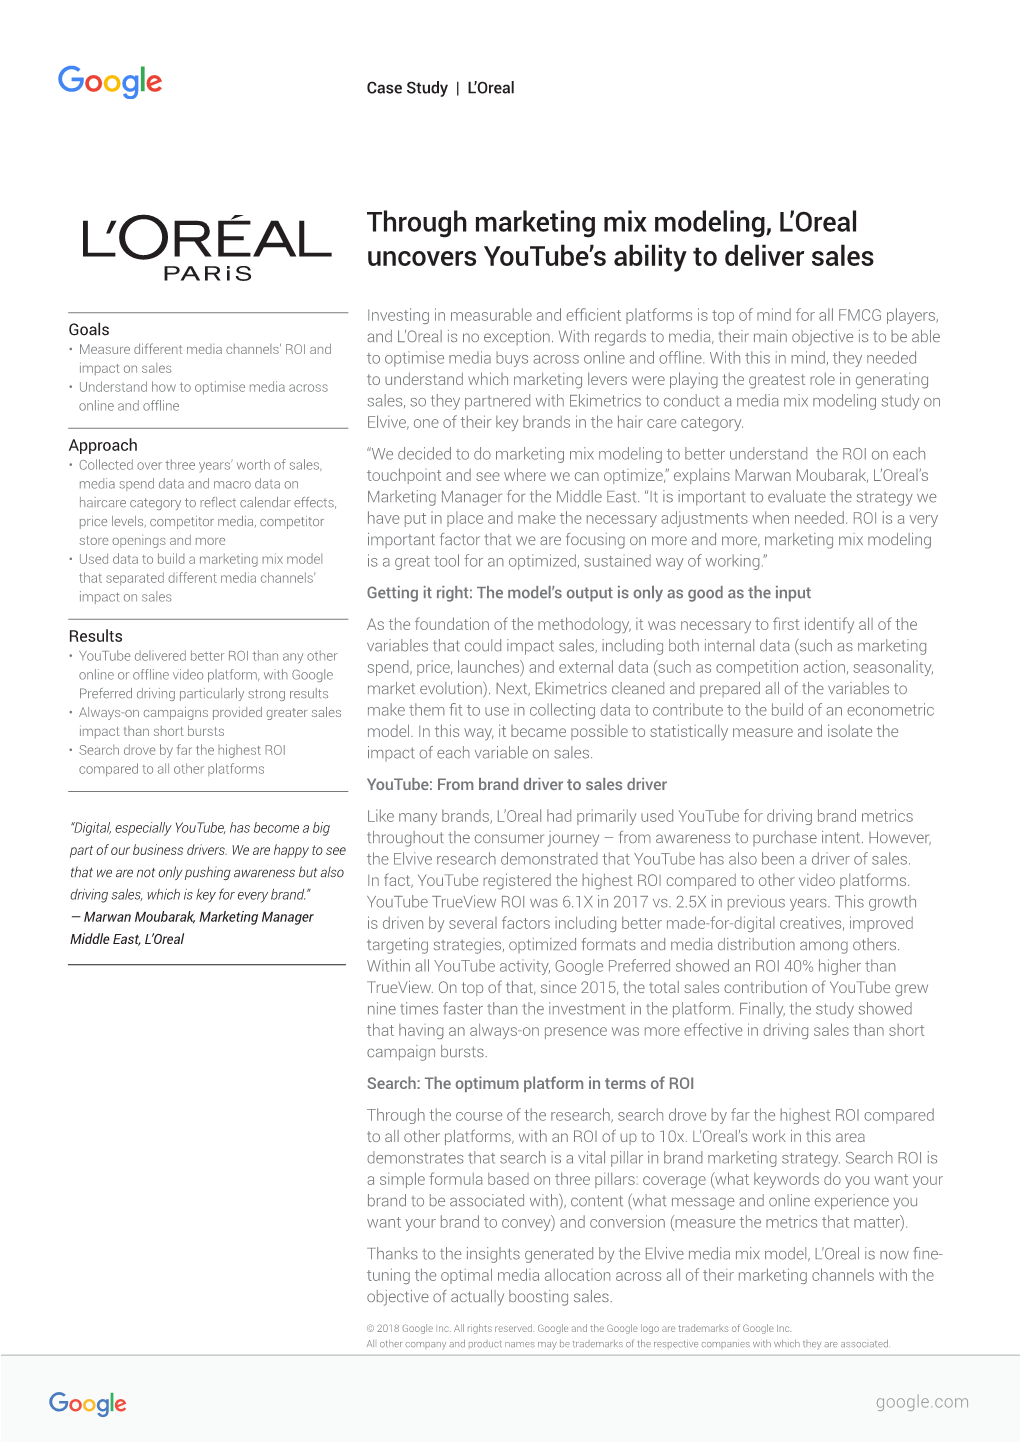 Through Marketing Mix Modeling, L'oreal Uncovers Youtube's Ability